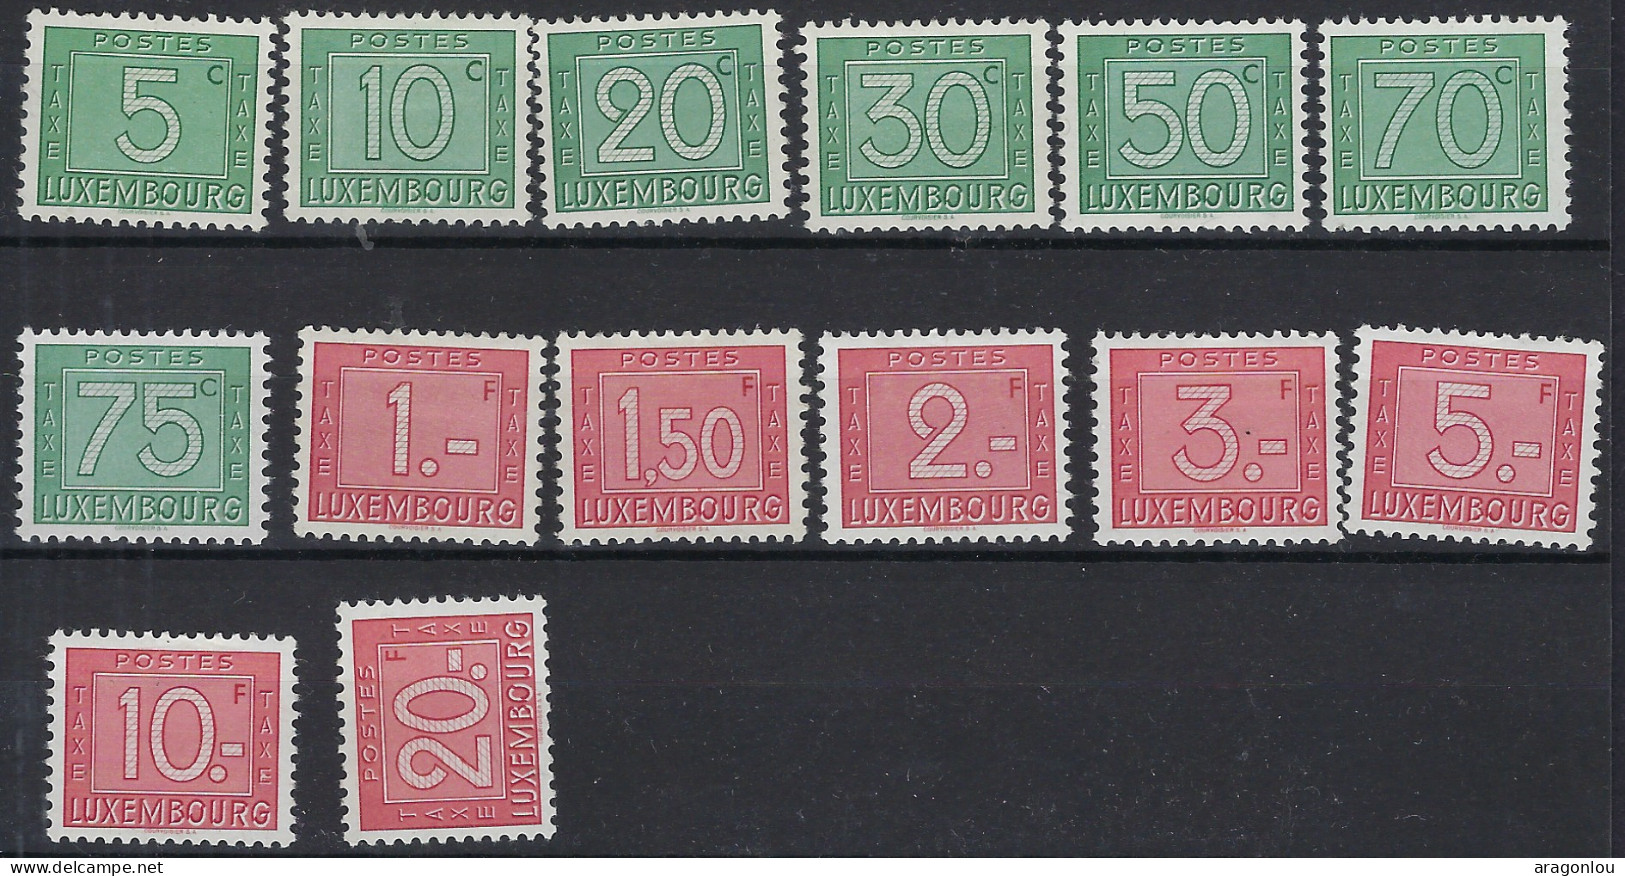 Luxembourg - Luxemburg - Timbres  1946/47    Chiffres     Série  * - Used Stamps